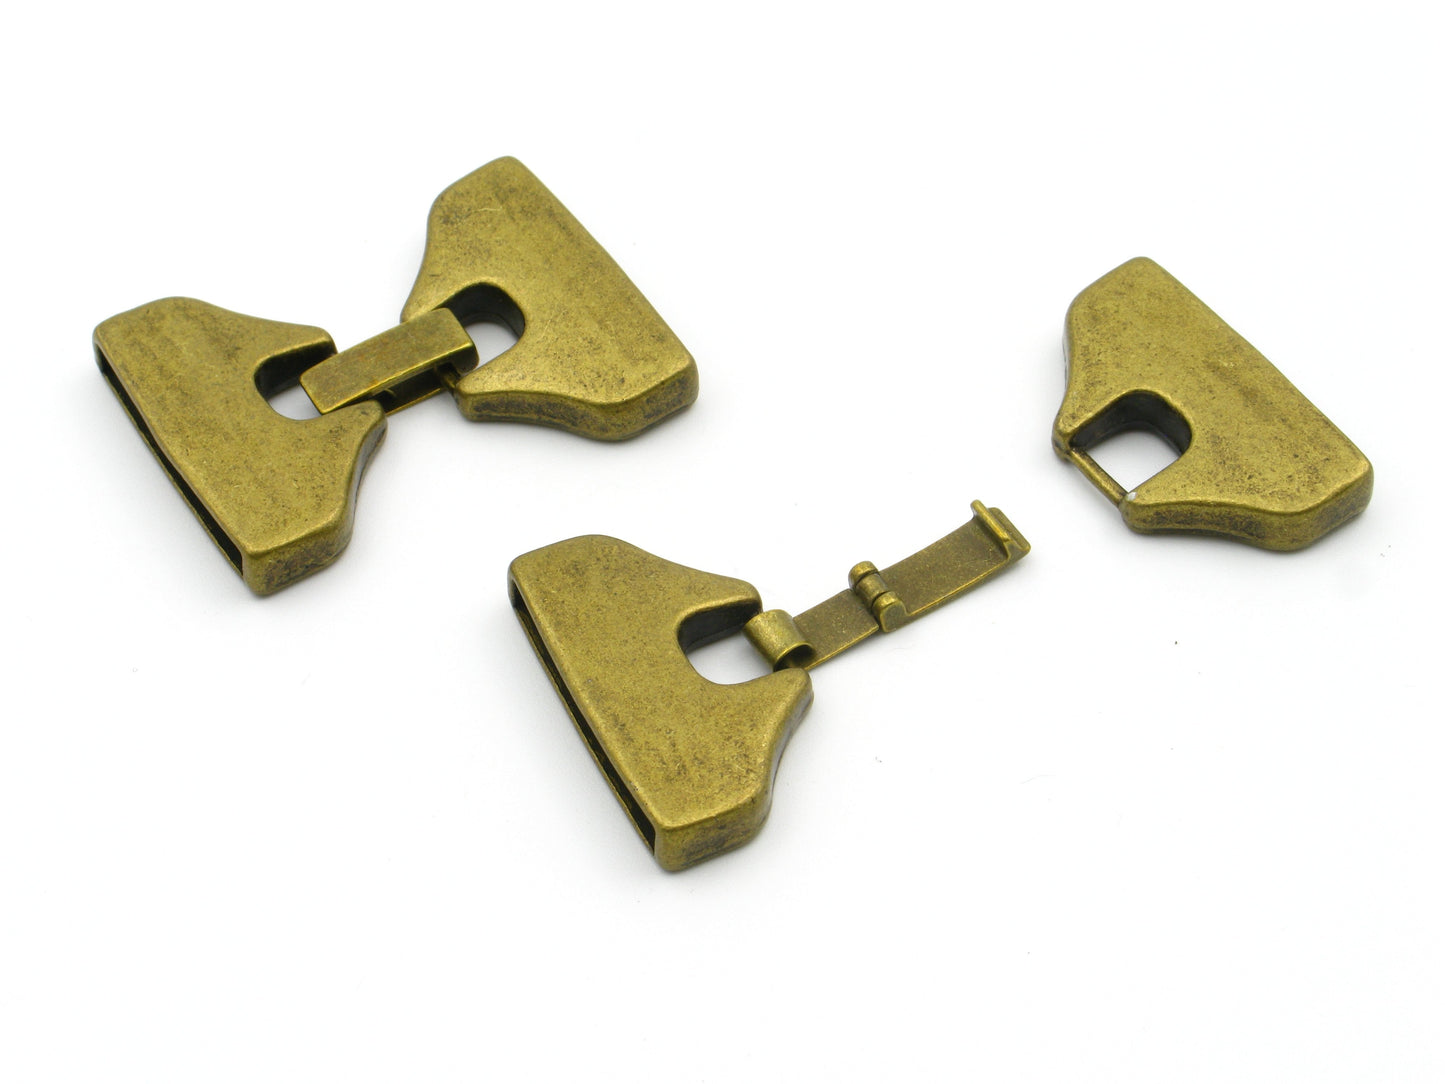 10Pcs for 25mm flat leather snap clasp brass, jewelry supplies jewelry finding D-6-30